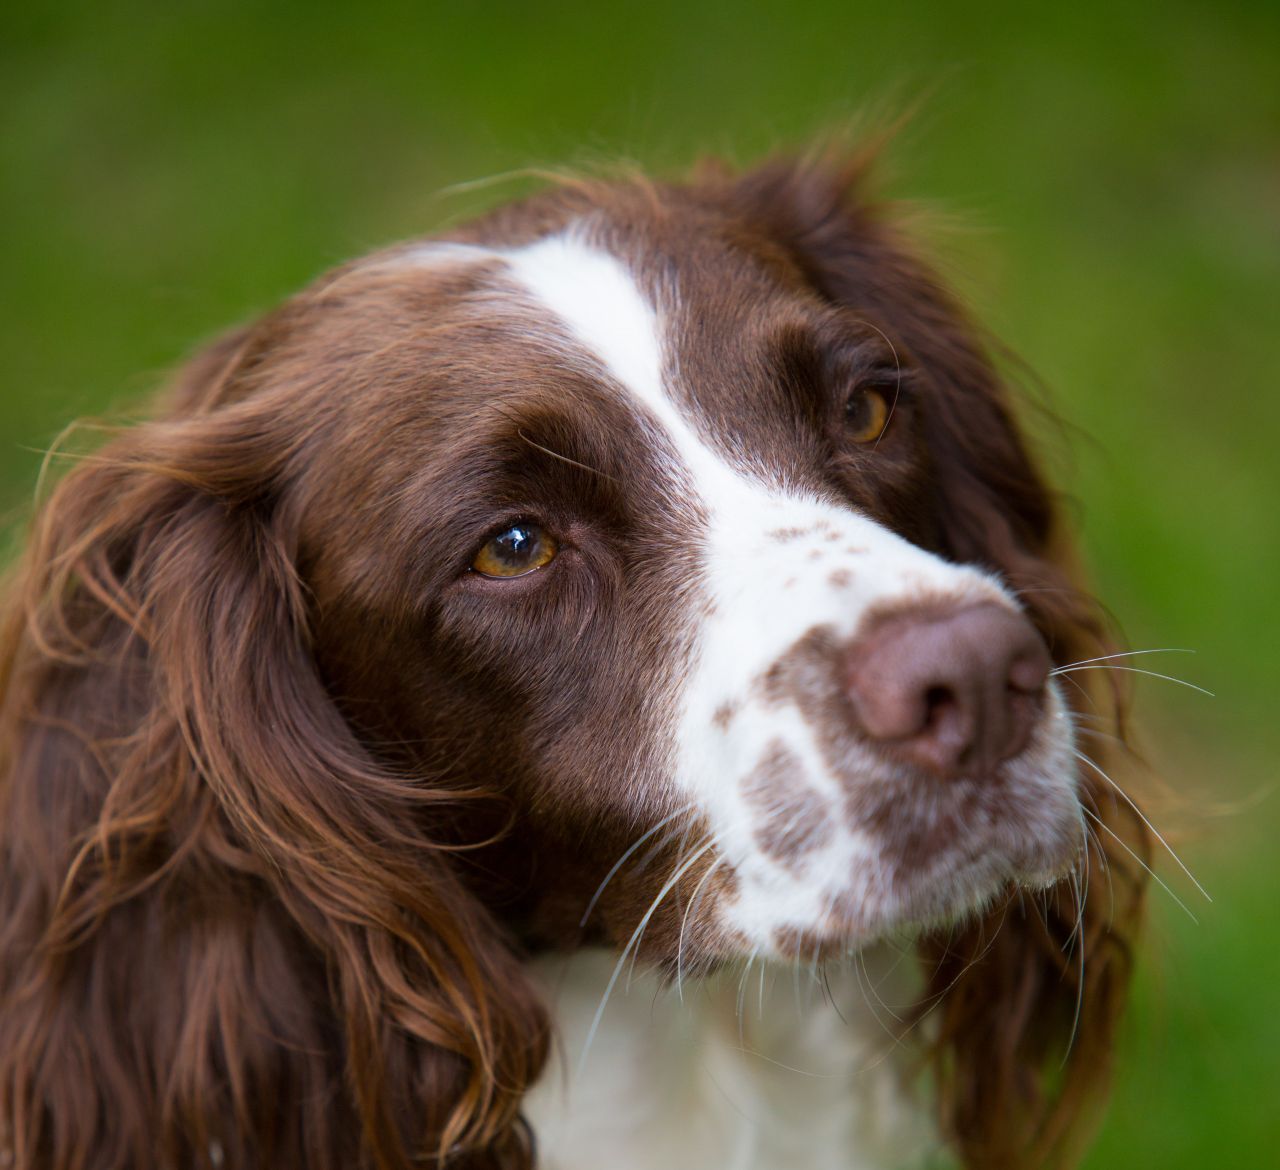 English Springer Spaniel Breed Guide - Learn about the English Springer